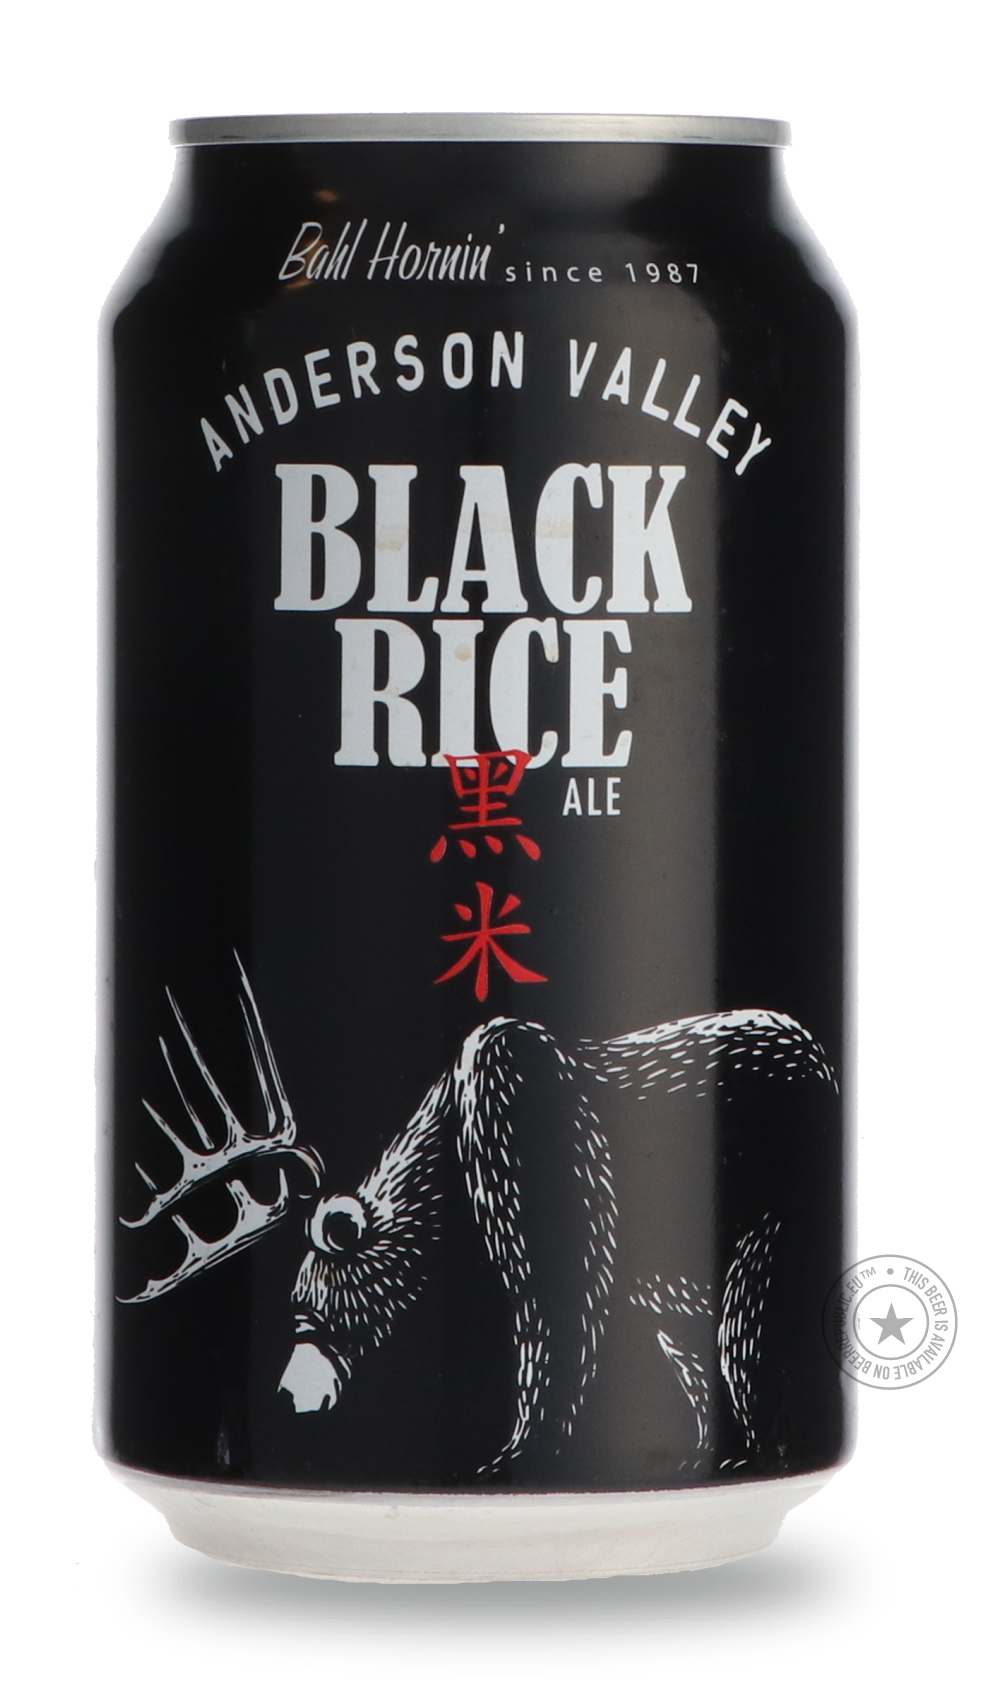 -Anderson Valley- Black Rice Ale-Brown & Dark- Only @ Beer Republic - The best online beer store for American & Canadian craft beer - Buy beer online from the USA and Canada - Bier online kopen - Amerikaans bier kopen - Craft beer store - Craft beer kopen - Amerikanisch bier kaufen - Bier online kaufen - Acheter biere online - IPA - Stout - Porter - New England IPA - Hazy IPA - Imperial Stout - Barrel Aged - Barrel Aged Imperial Stout - Brown - Dark beer - Blond - Blonde - Pilsner - Lager - Wheat - Weizen -